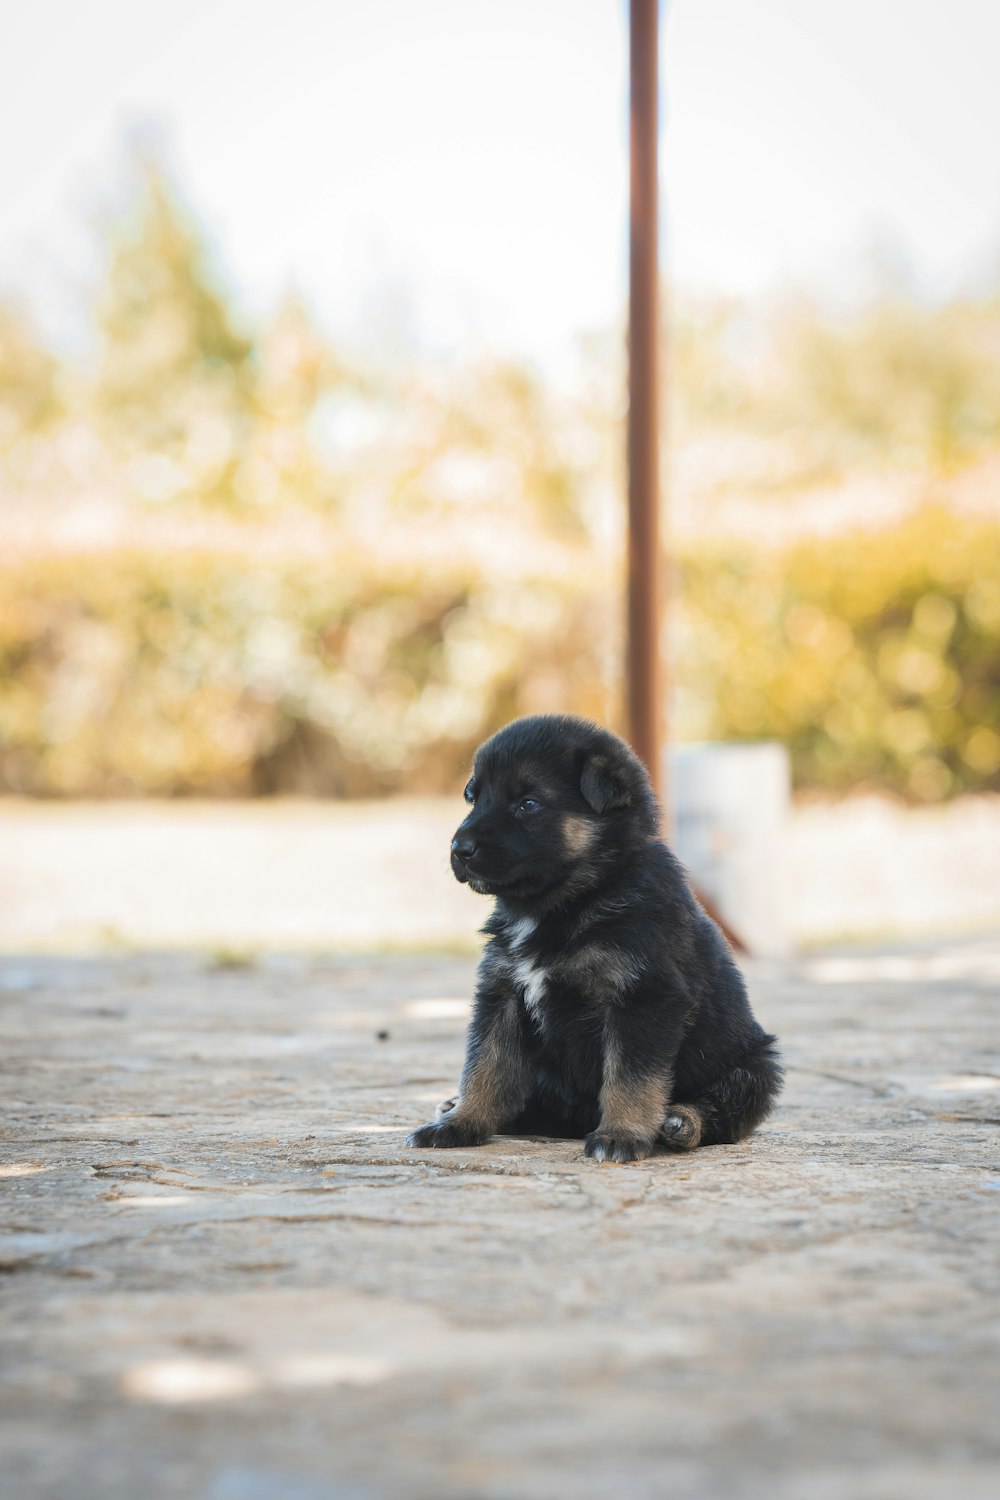 black and brown short coated puppy on gray concrete floor during daytime